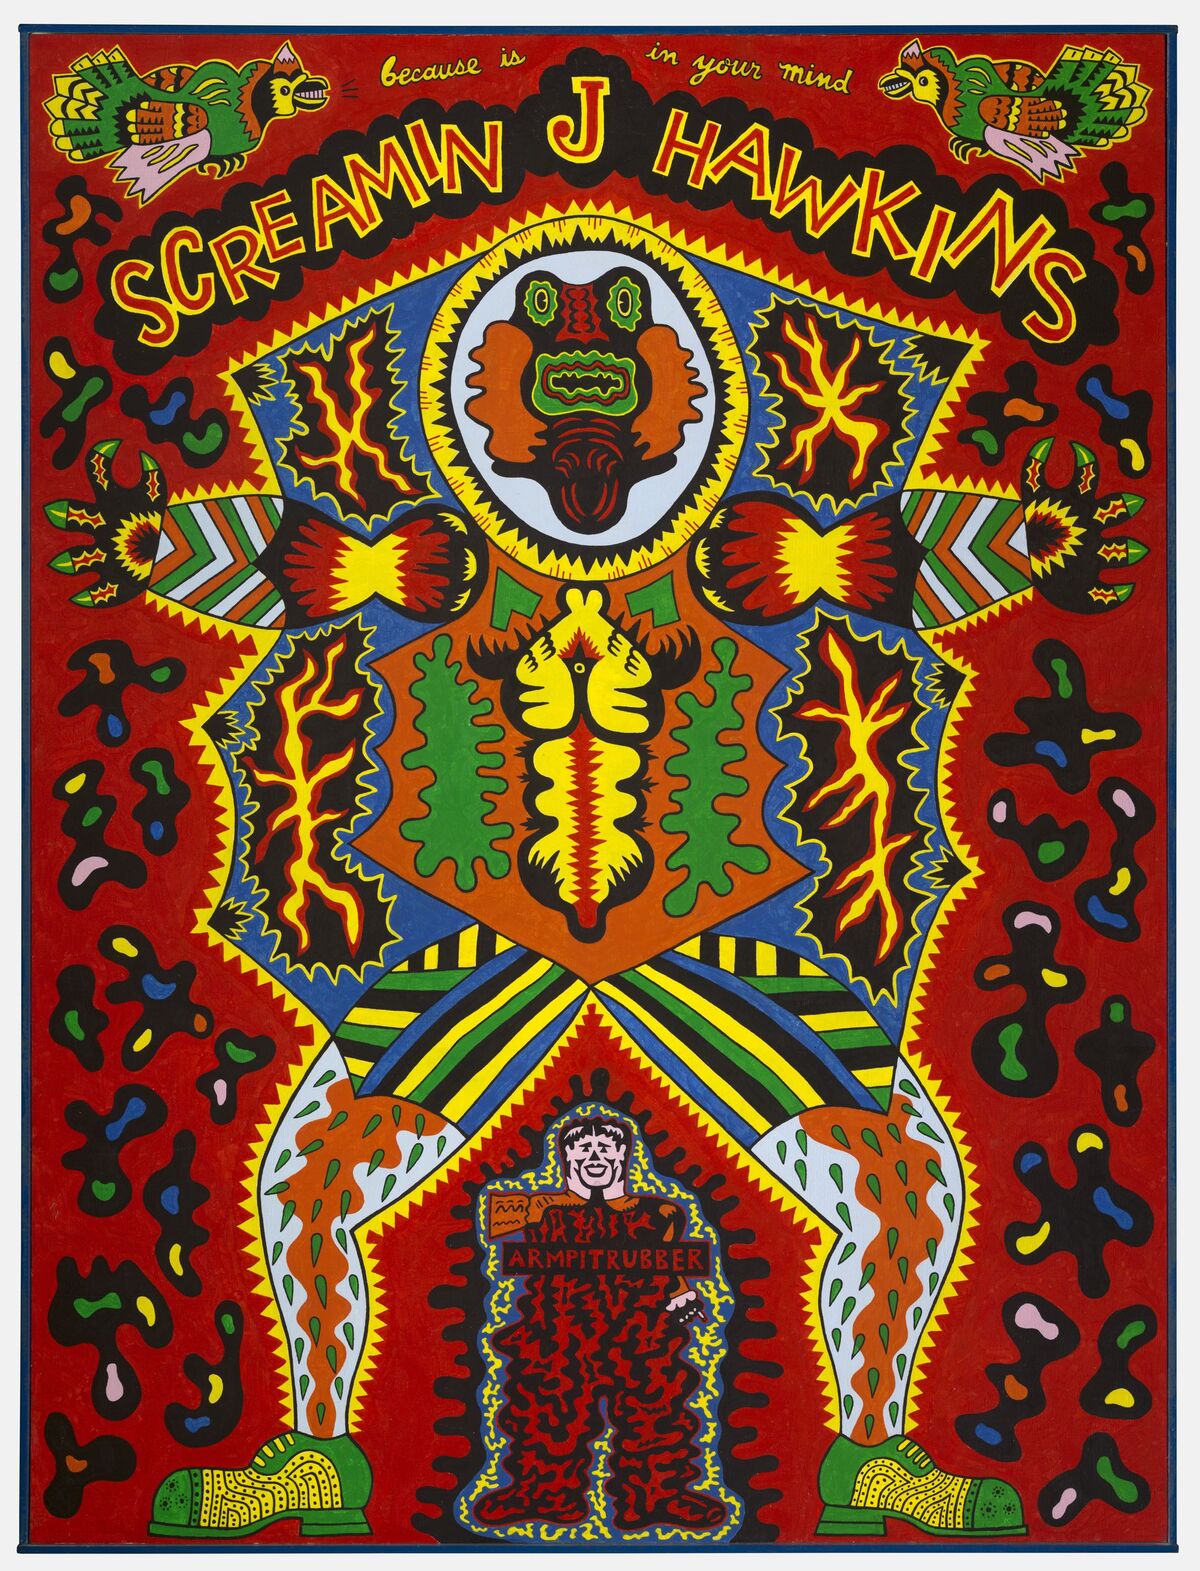 Karl Wirsum. Screamin’ Jay Hawkins, 1968. The Art Institute of Chicago, Mr. and Mrs. Frank G. Logan Purchase Prize Fund. ˝ Karl Wirsum. On view in Hairy Who? 1966–1969 at The Art Institute.